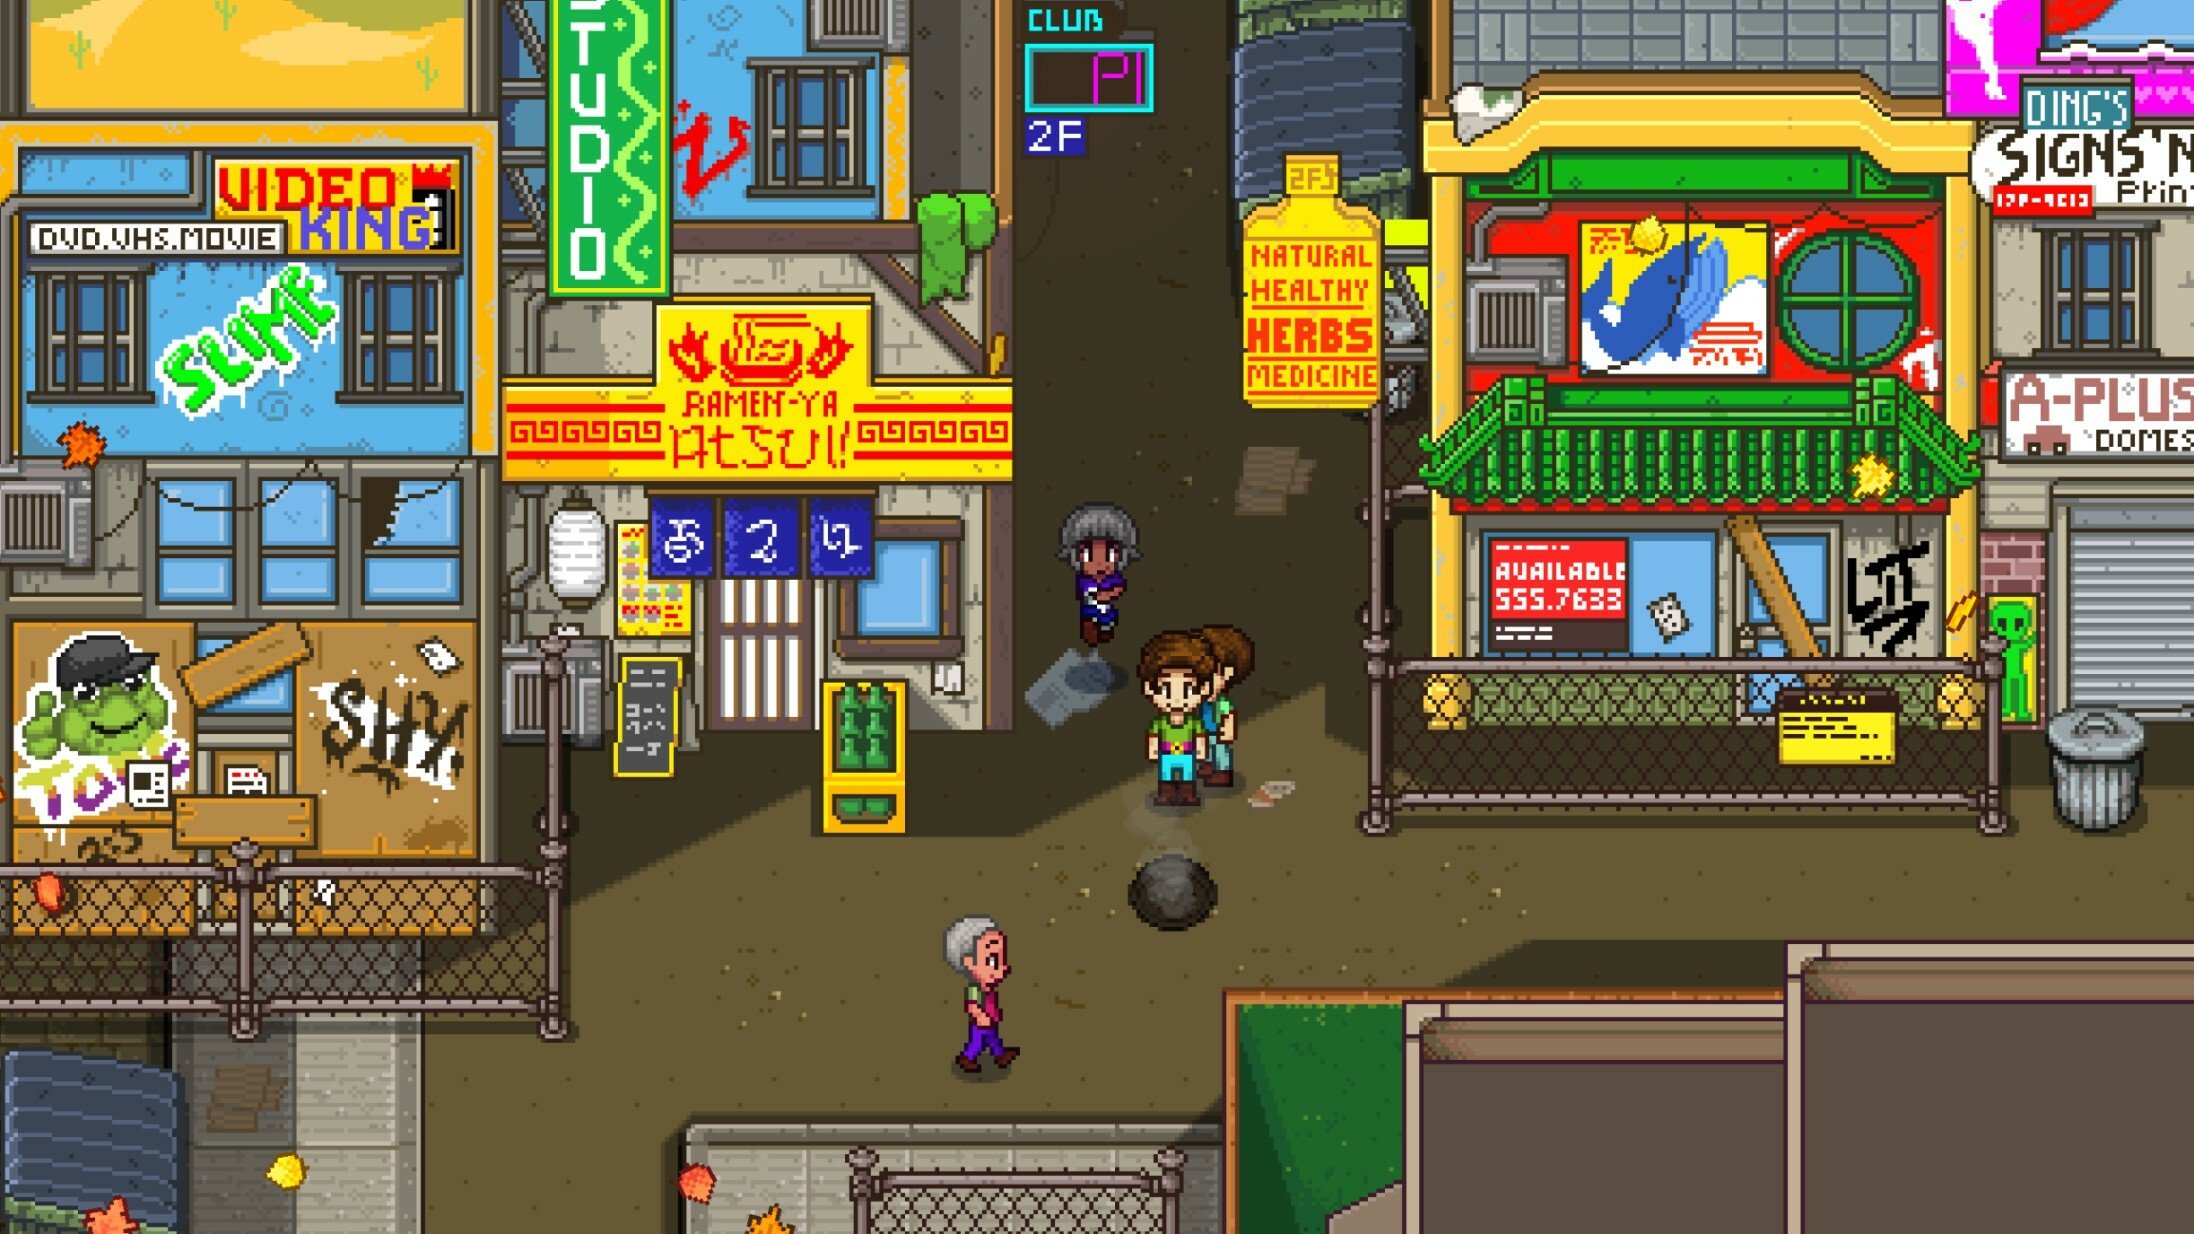 #
      Former Stardew Valley developer announces city life simulation game Sunkissed City for consoles, PC